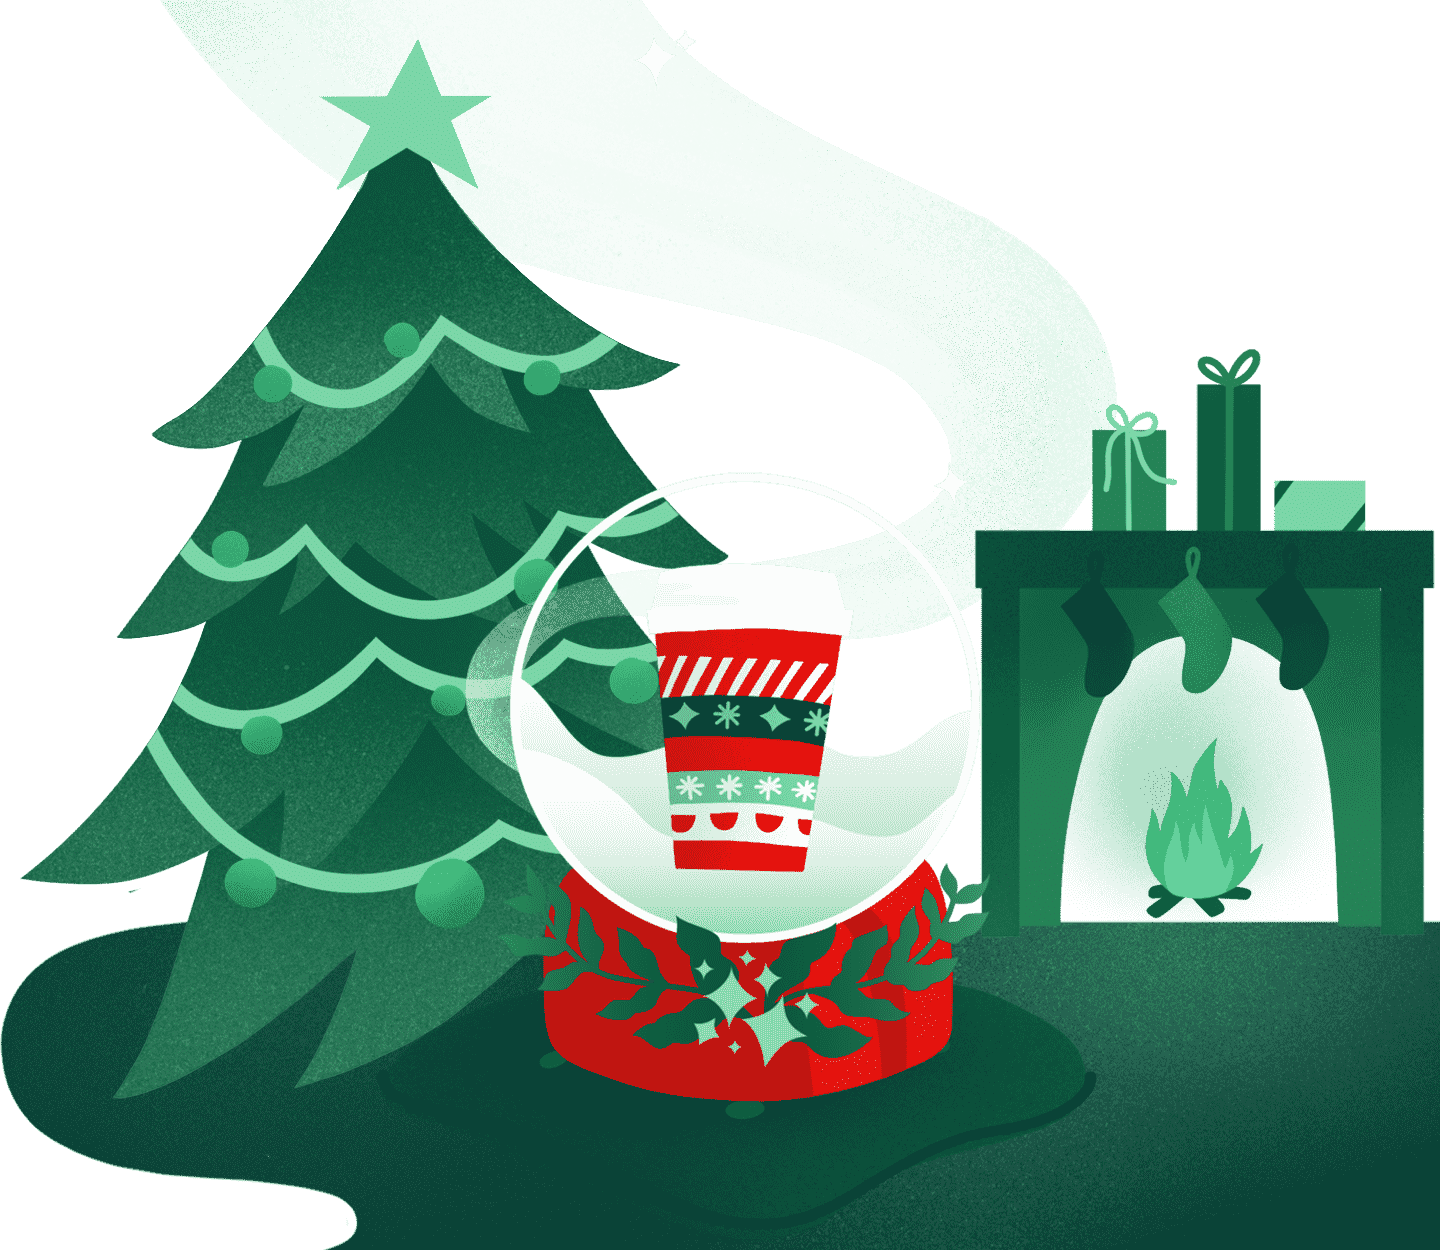 A Starbucks cup in a snow globe surrounded by holiday decorations.